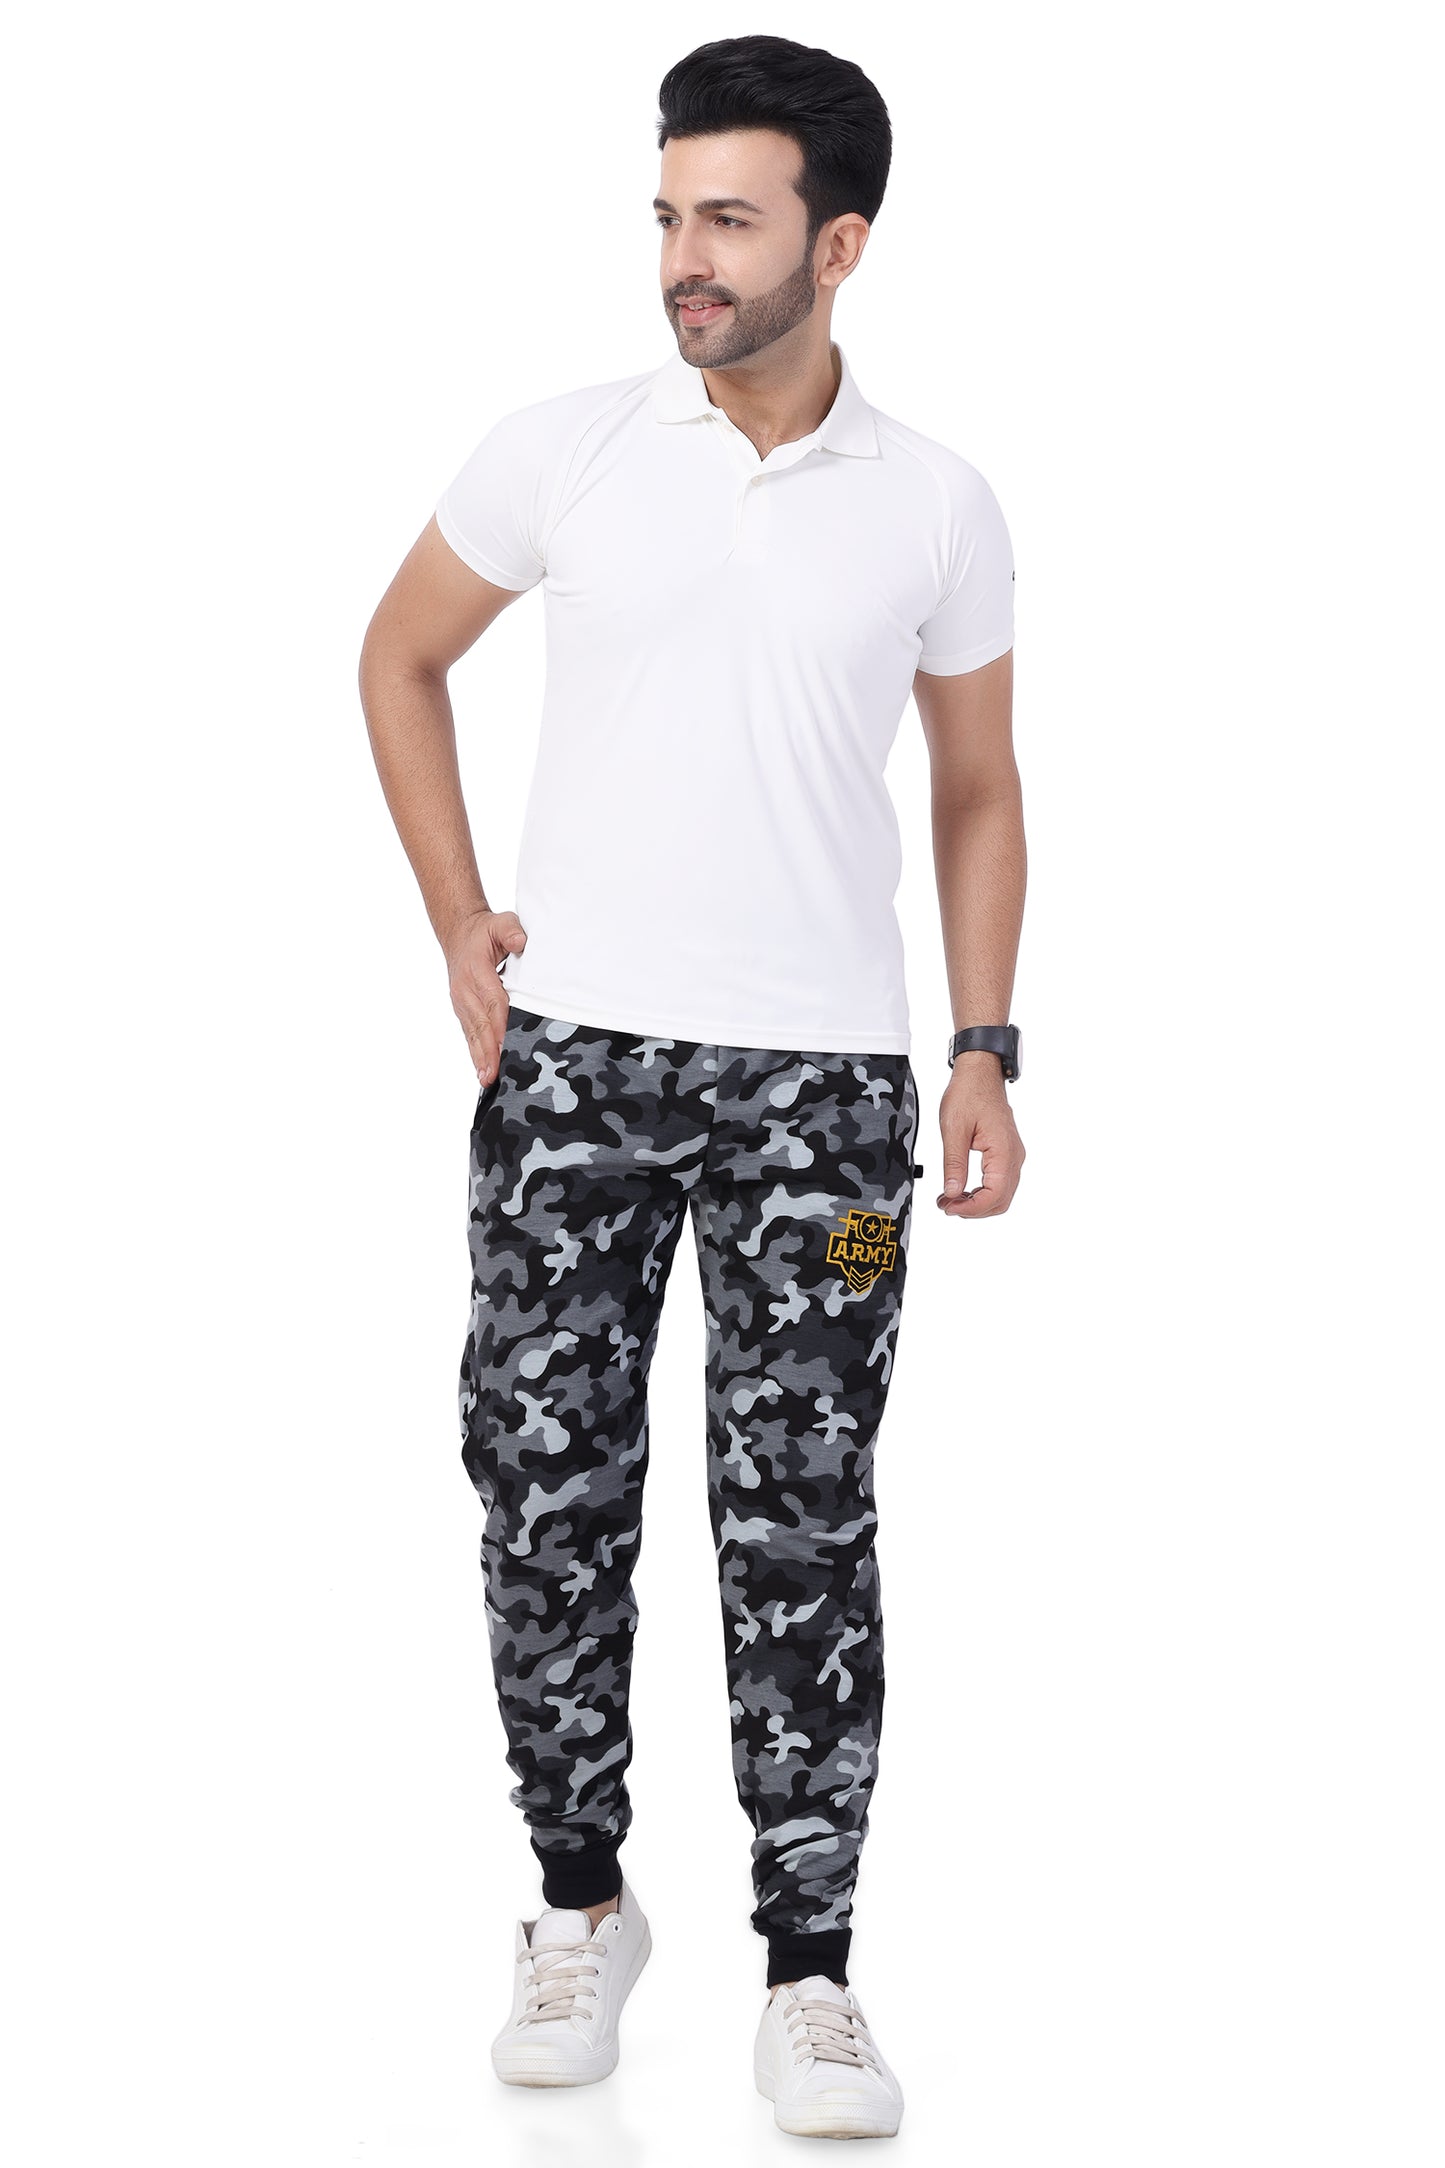 Neo Garments Men's Cotton Military Grey Camouflage Sweatpants | SIZE FROM M TO 7XL